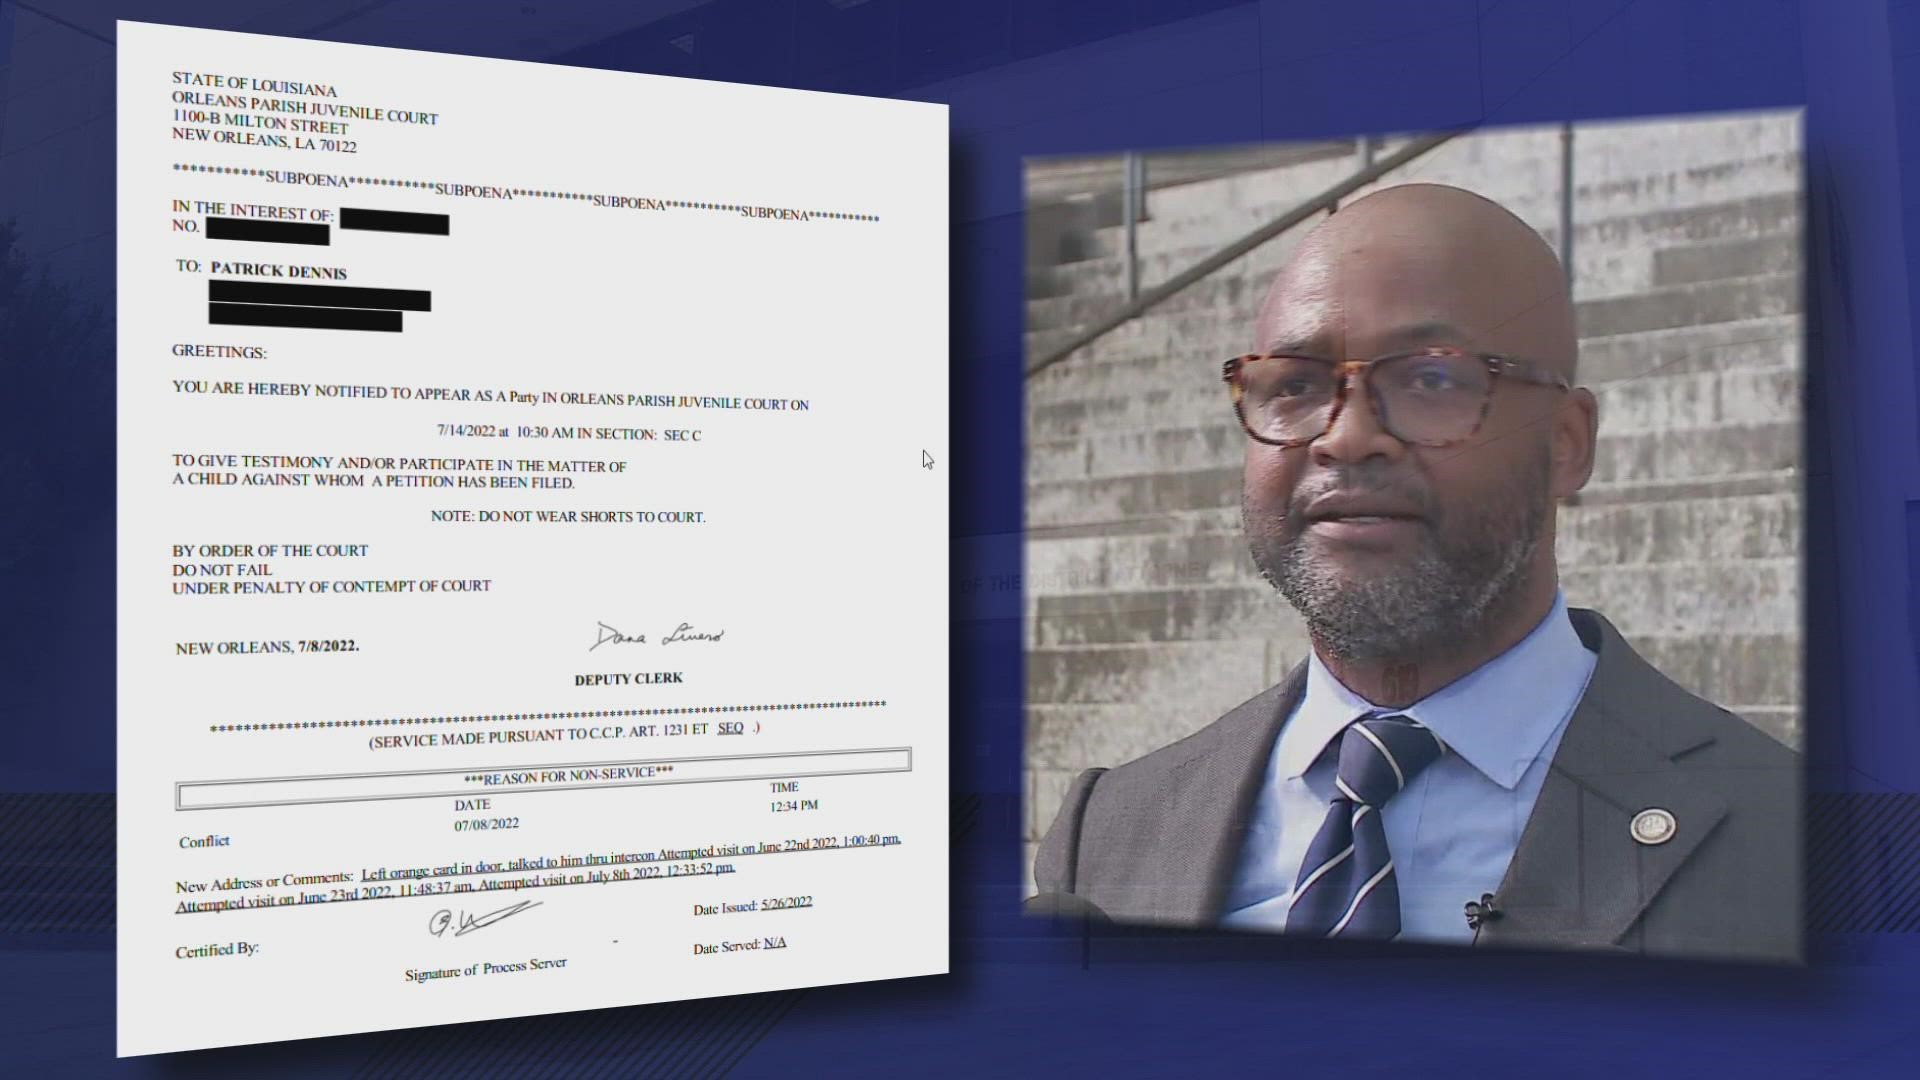 DA Jason Williams said a subpoena was issued to try to notify the doctor of the trial date and 3 attempts were made to deliver it to his home.